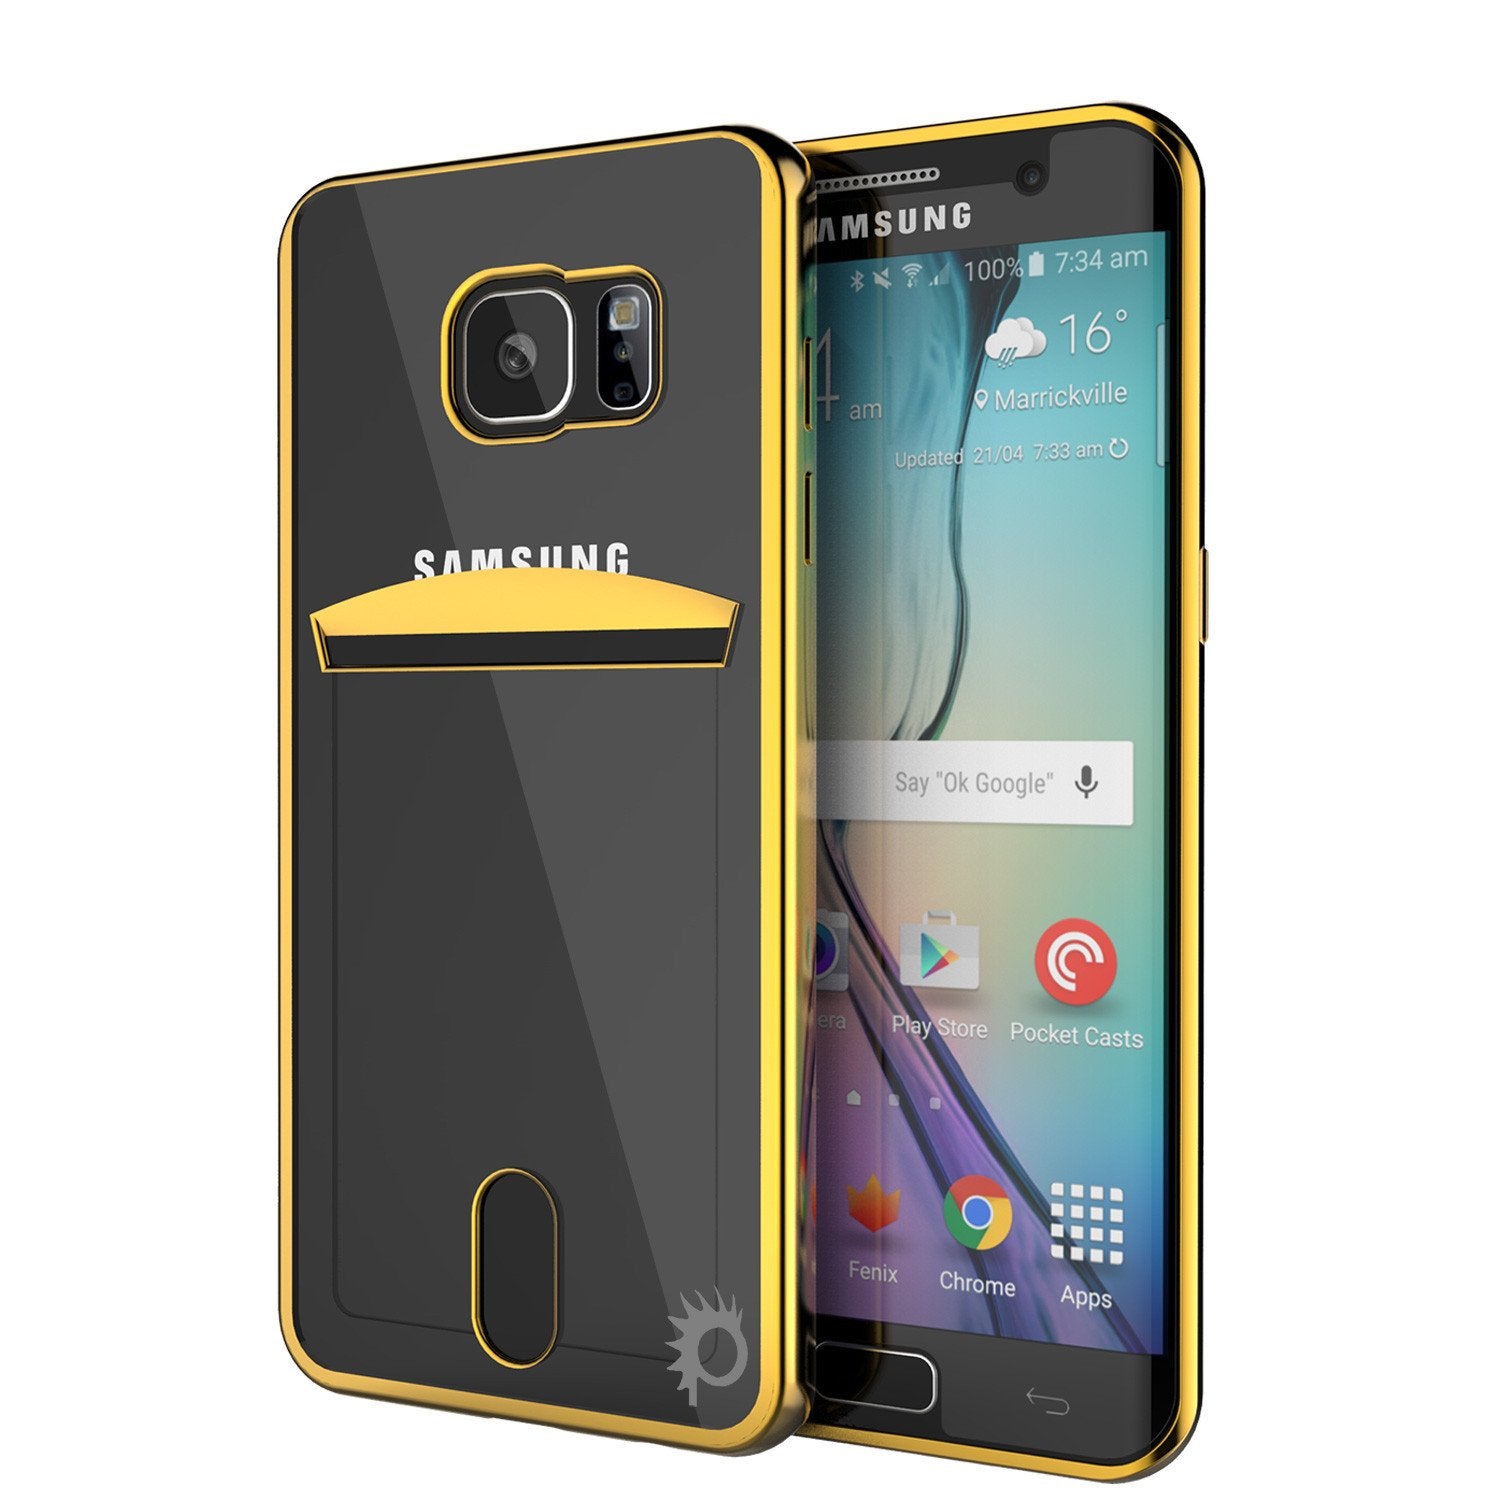 Galaxy S6 Case, PUNKCASE® LUCID Gold Series | Card Slot | SHIELD Screen Protector | Ultra fit